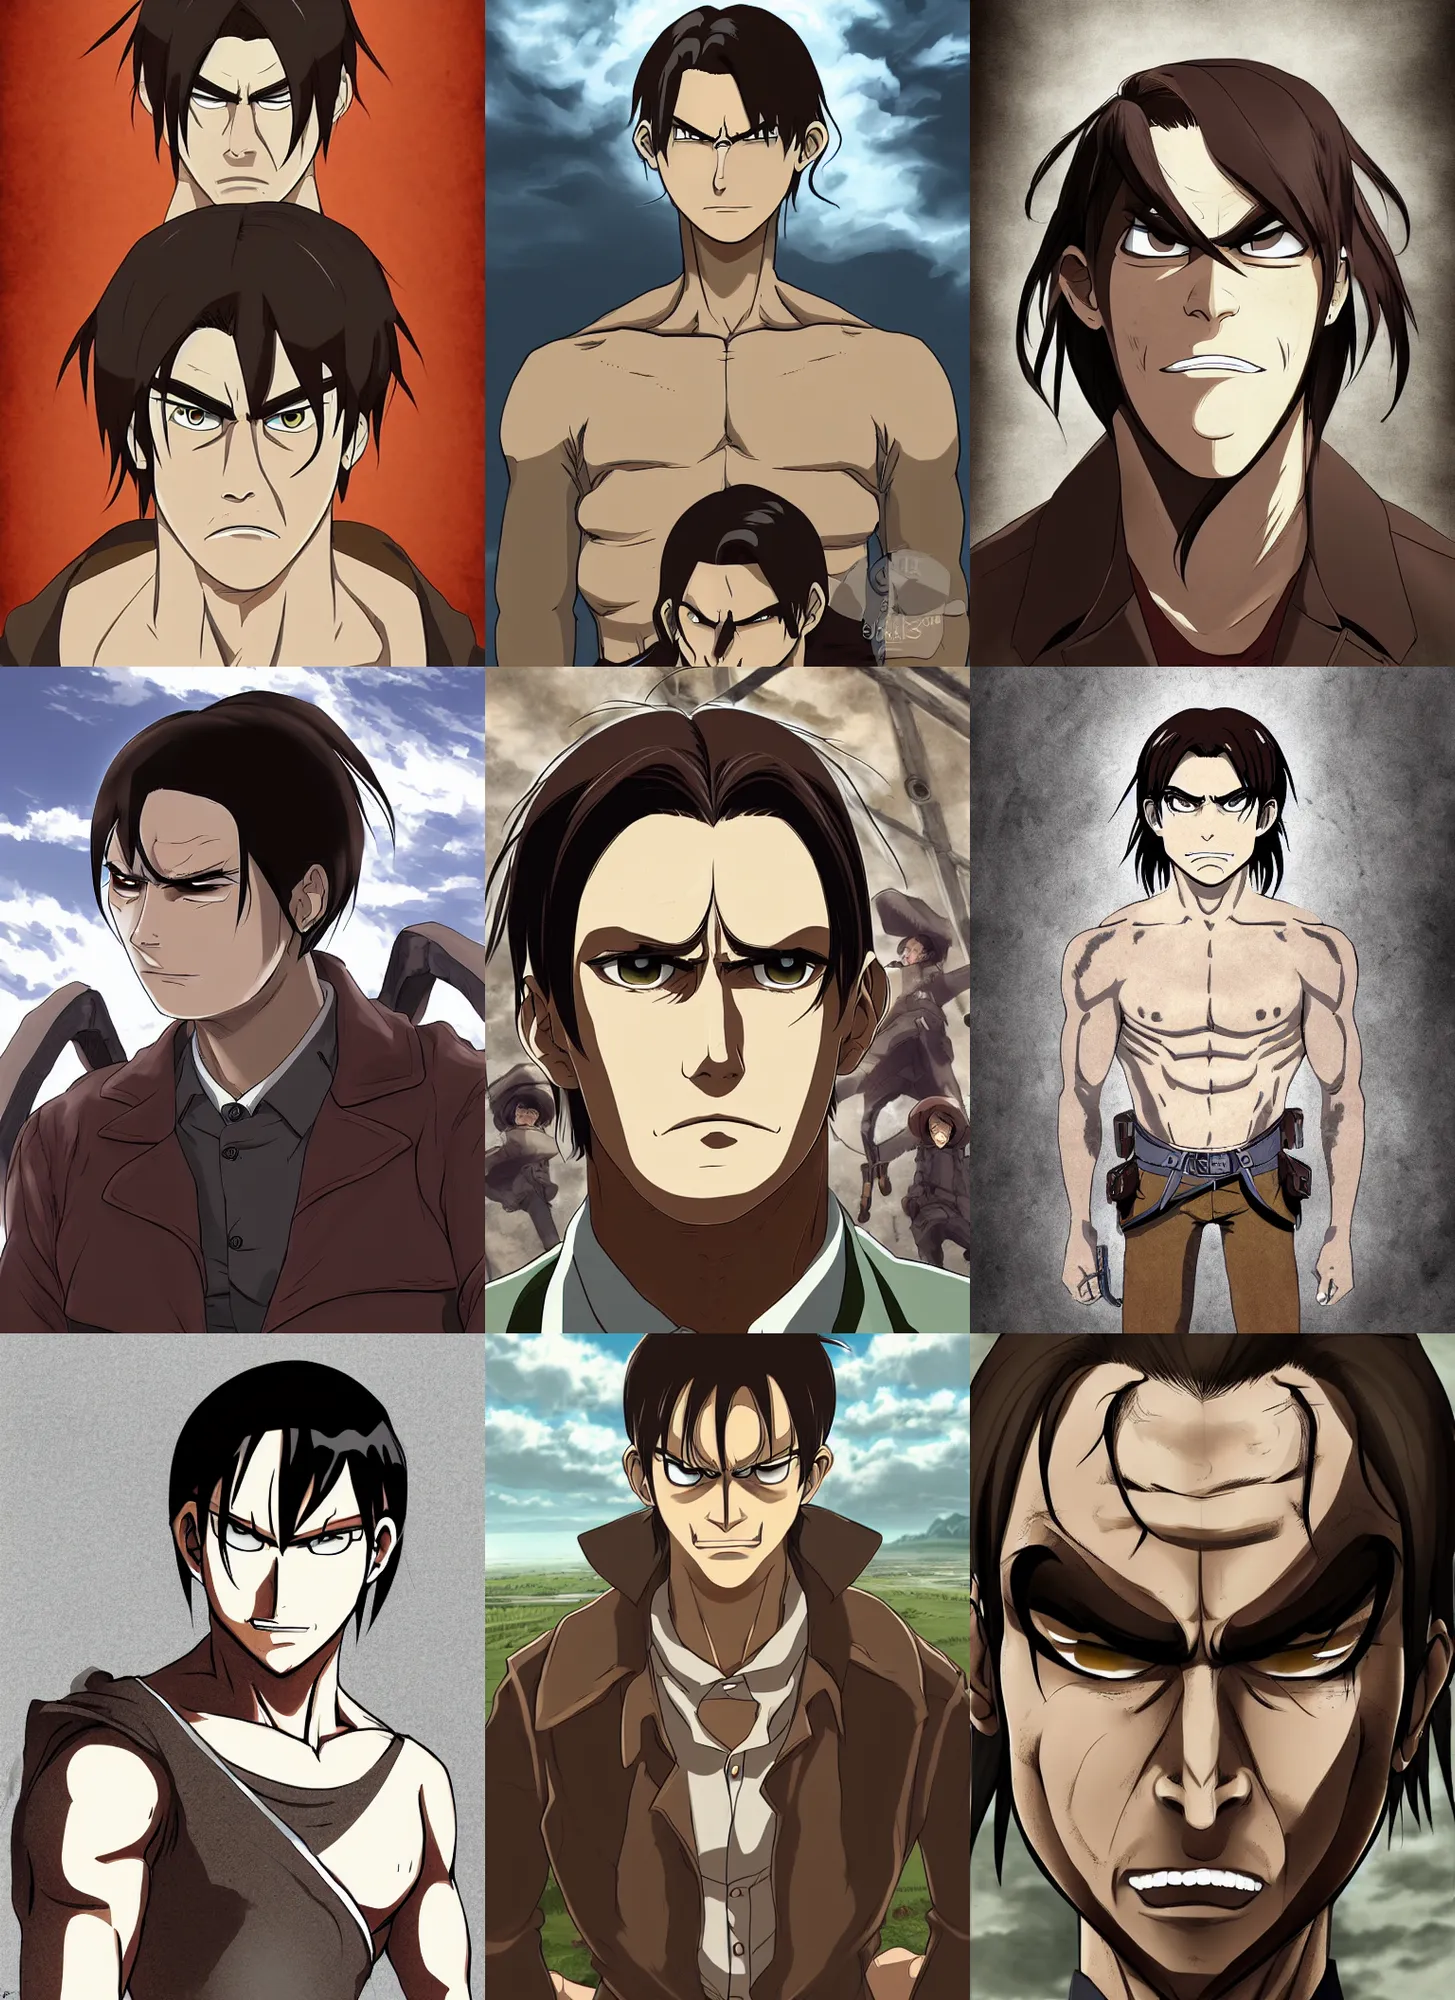 Prompt: portrait of a man in his late twenties with longish brown hair tied back, widows peak and a round face in the style of attack on titan, digital art